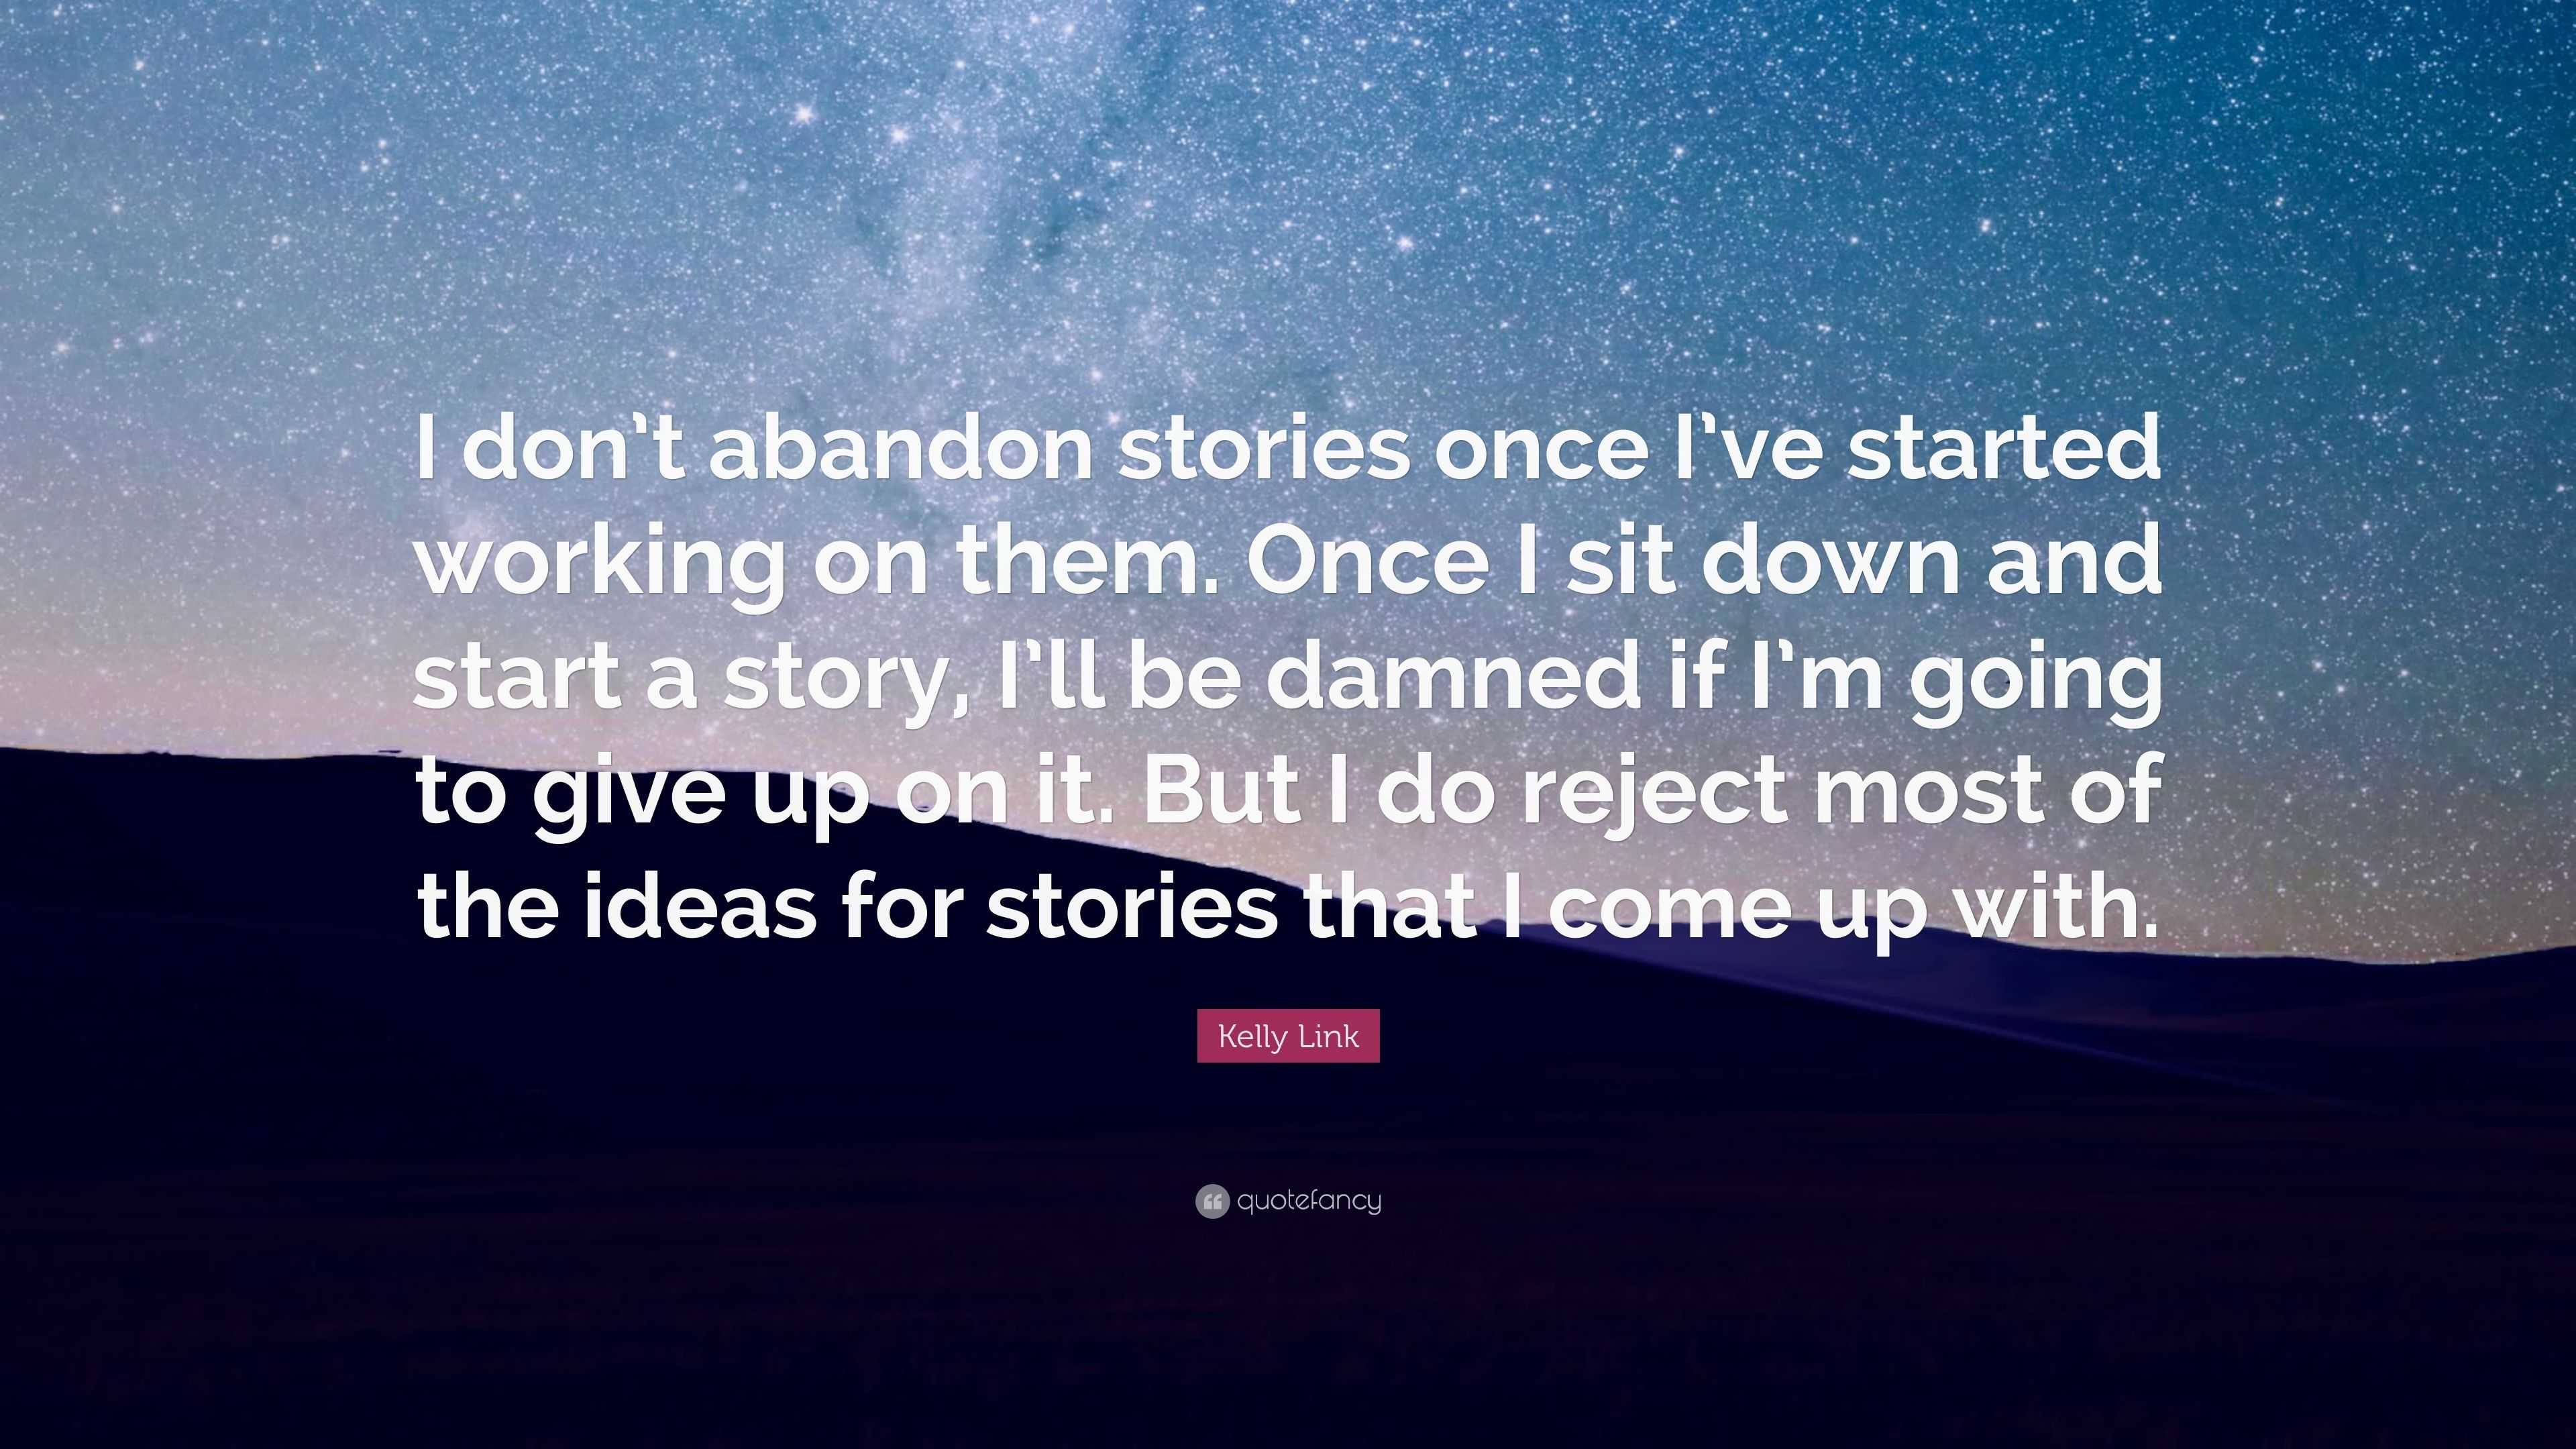 Kelly Link Quote: “I don’t abandon stories once I’ve started working on ...